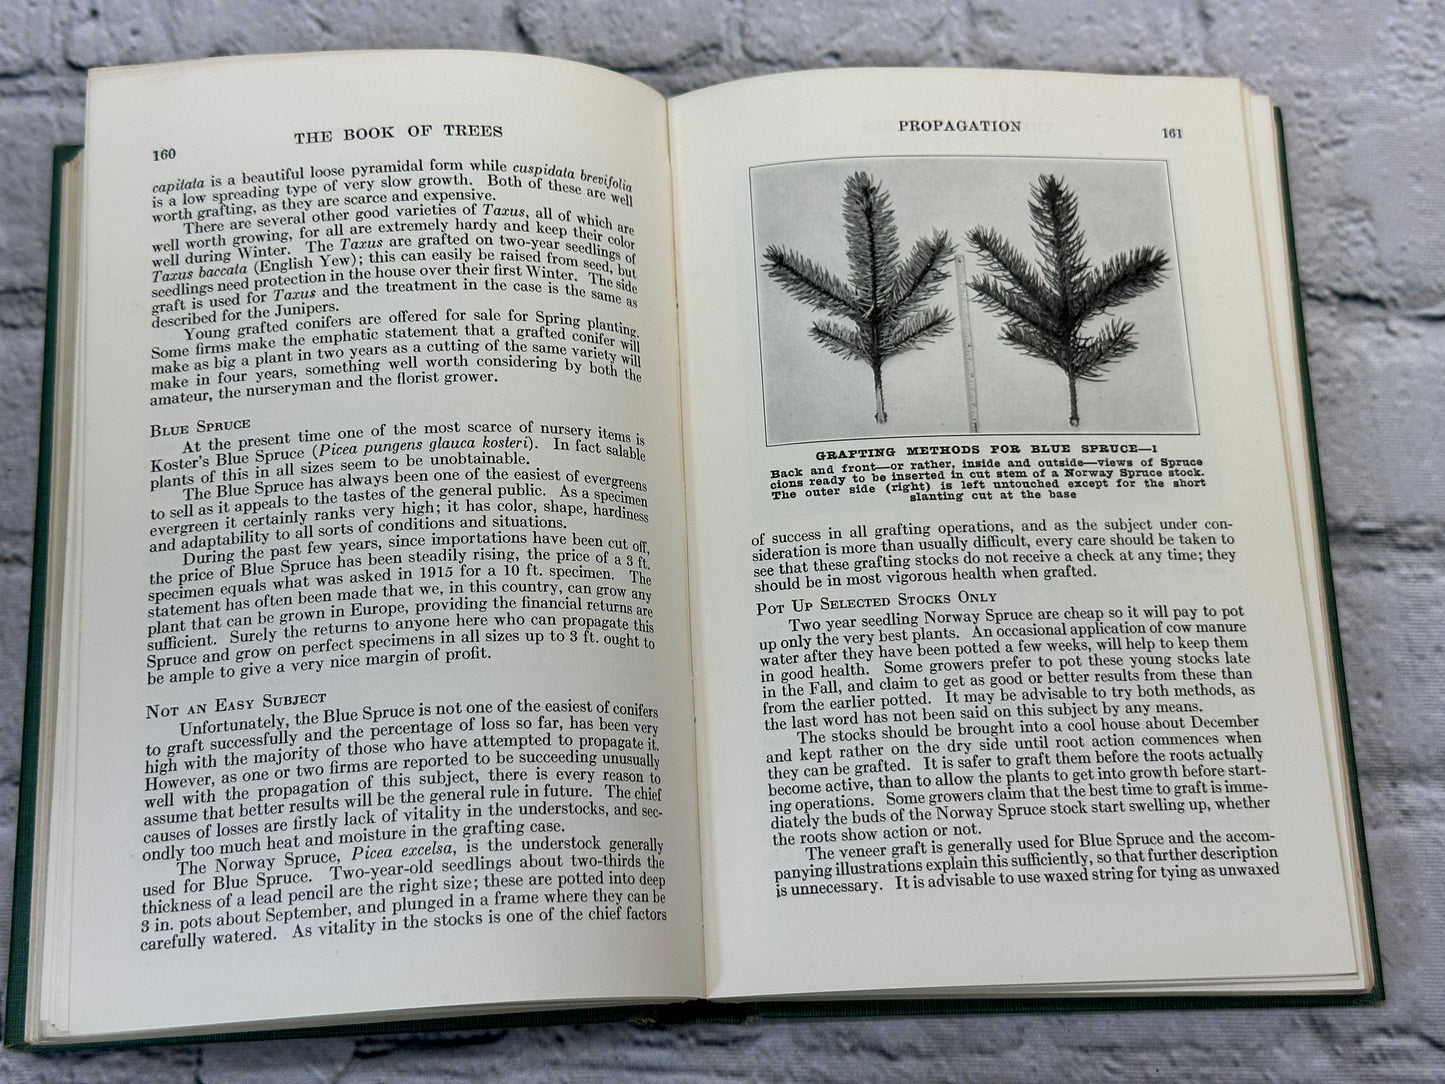 The Book Of Trees by Alfred C. Hottes [1949 · Fifth Printing]